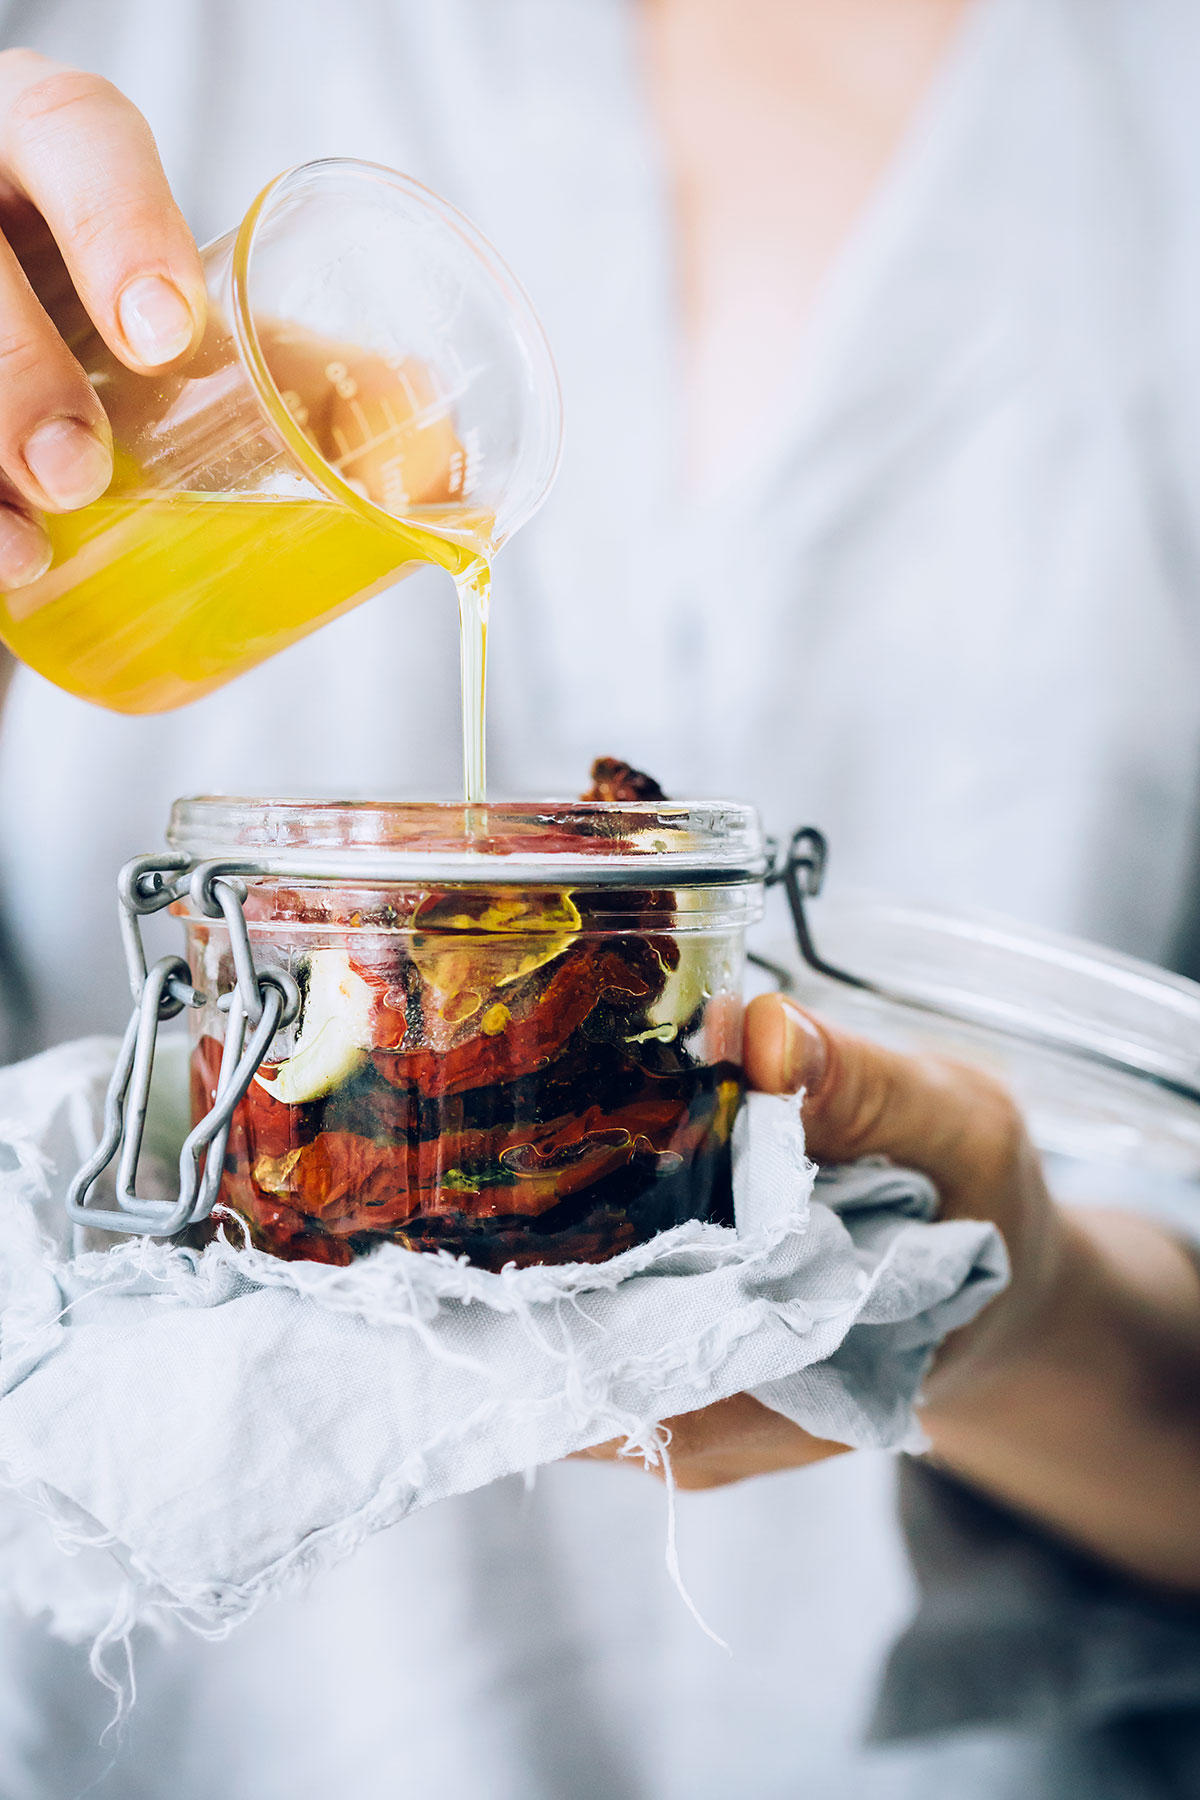 How to Make Your Own Homemade Sun-Dried Tomatoes